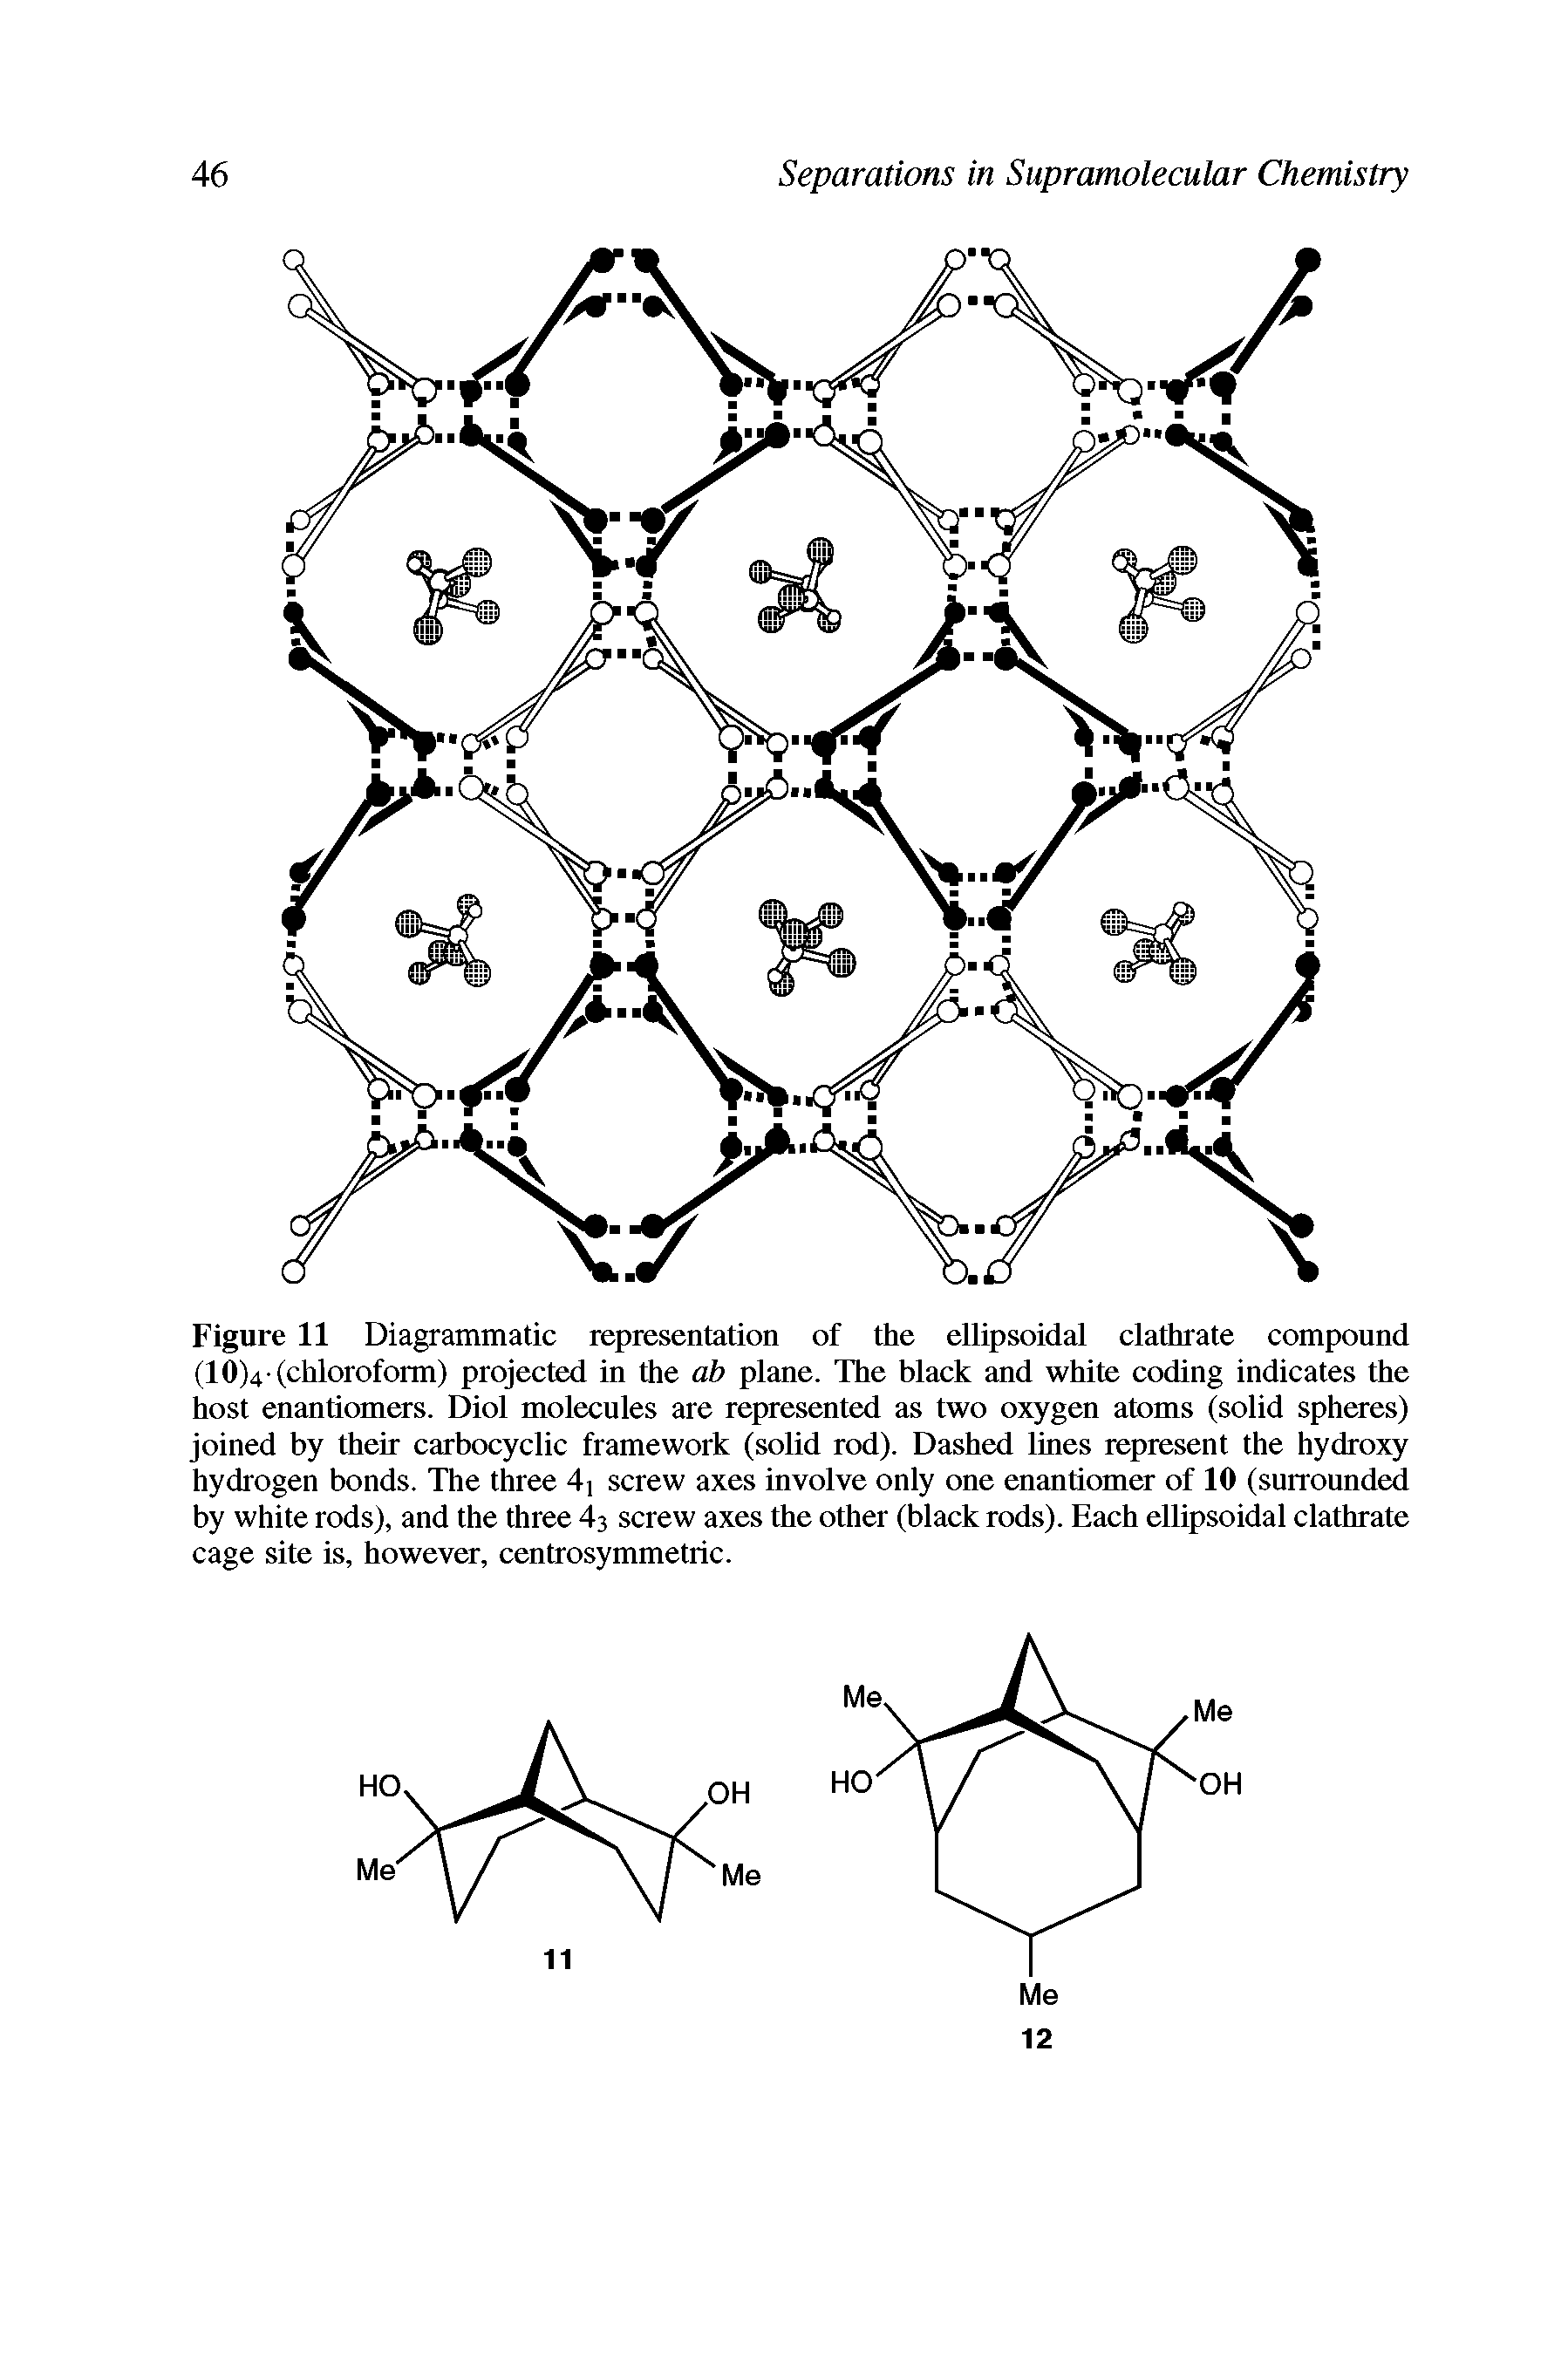 Figure 11 Diagrammatic representation of the ellipsoidal clathrate compound (10)4 (chloroform) projected in the ab plane. The black and white coding indicates the host enantiomers. Diol molecules are represented as two oxygen atoms (solid spheres) joined by their carbocyclic framework (solid rod). Dashed lines represent the hydroxy hydrogen bonds. The three 4 screw axes involve only one enantiomer of 10 (surrounded by white rods), and the three 43 screw axes the other (black rods). Each ellipsoidal clathrate cage site is, however, centrosymmetric.